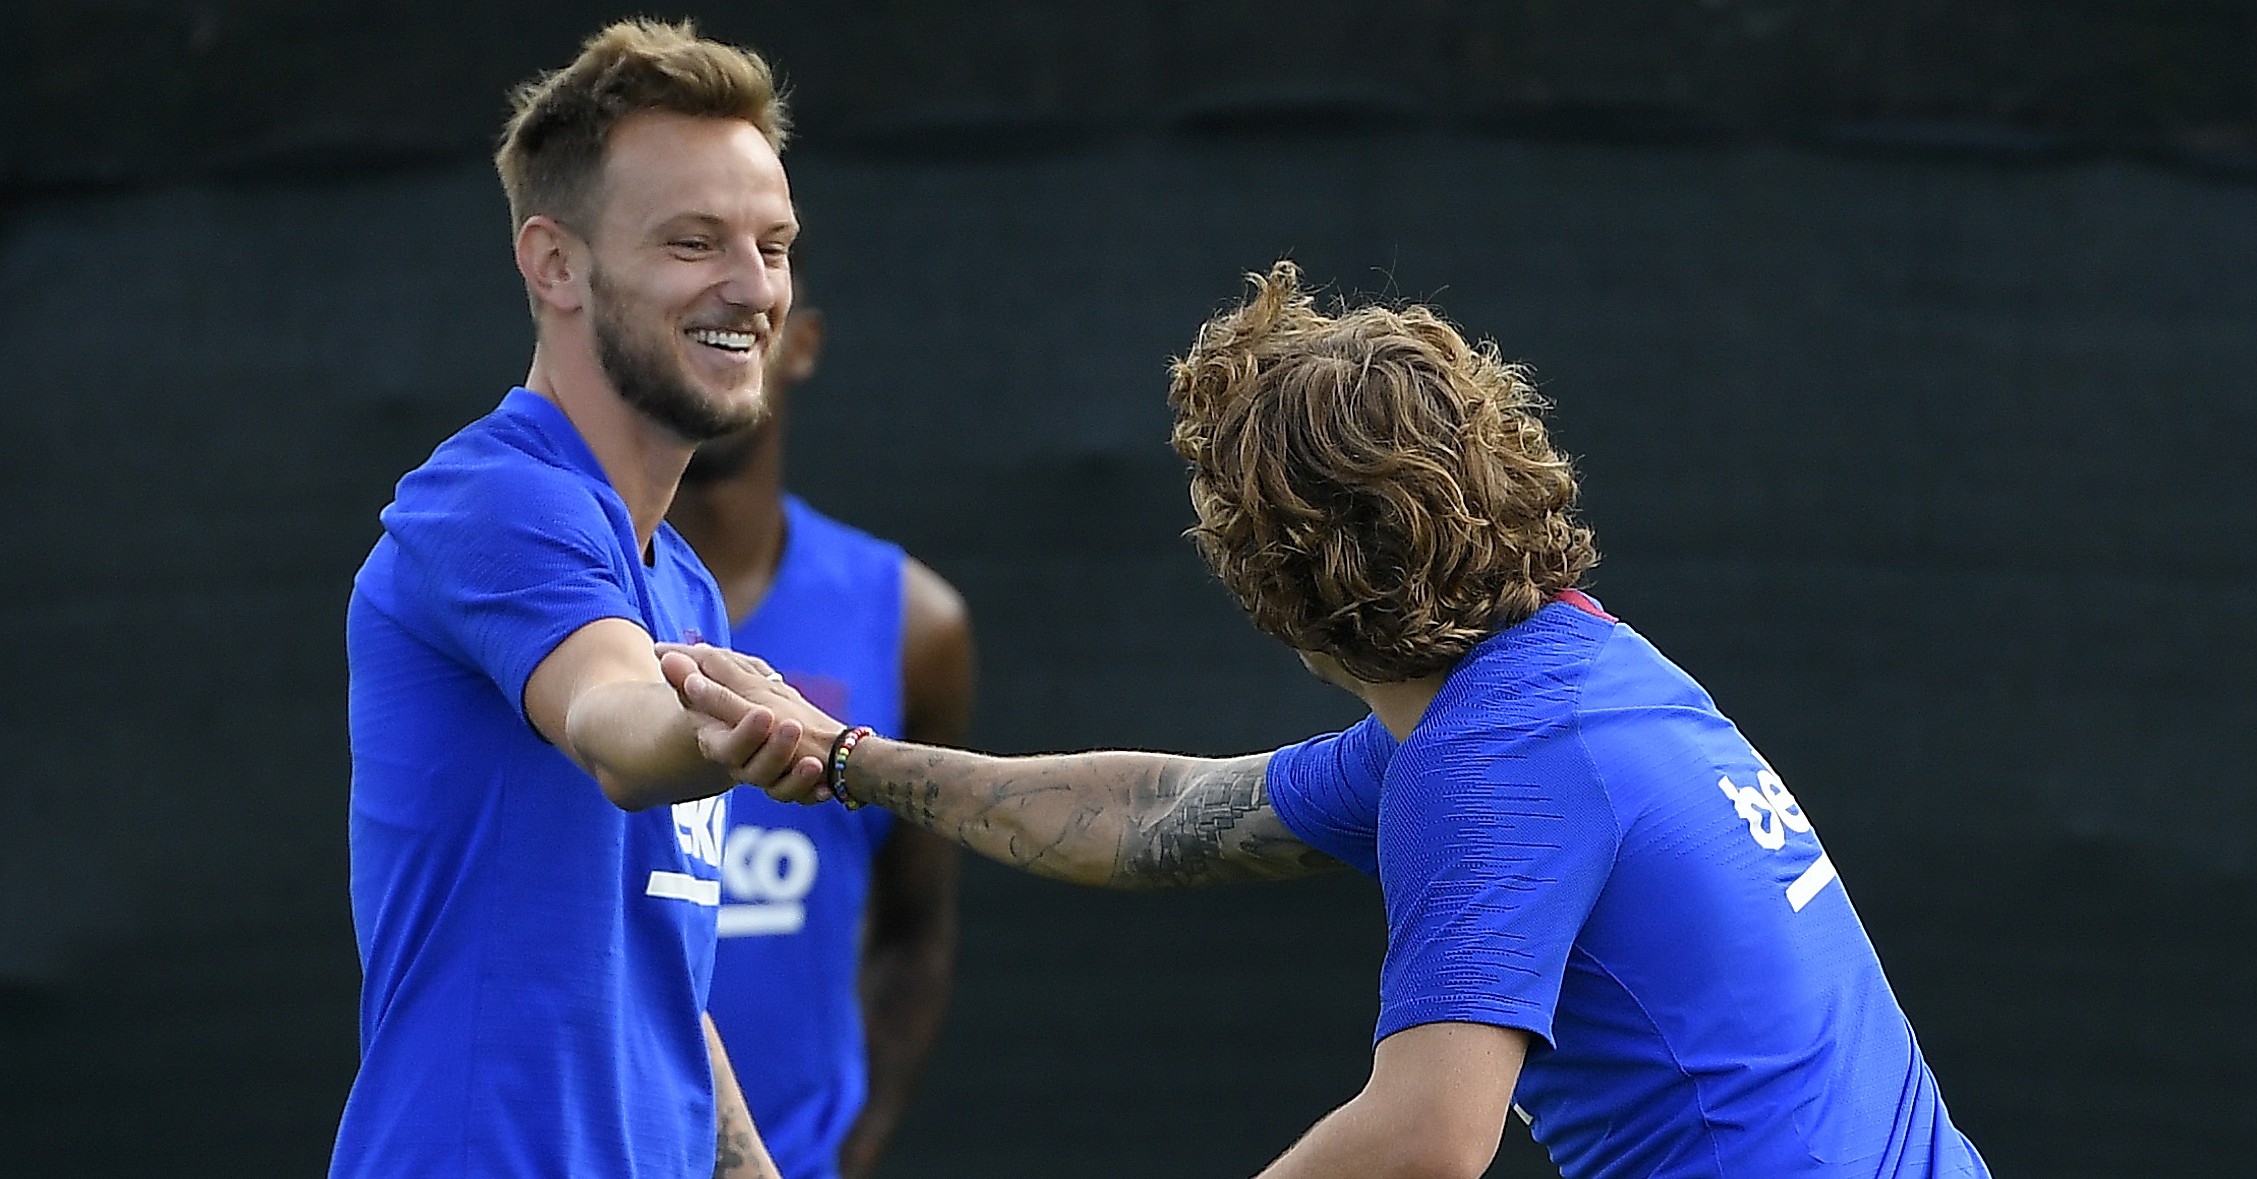 Barcelona's French forward Antoine Griezmann (R) jokes with Barcelona's Croatian midfielder Ivan Rakitic during the football club's first pre-season training session at the Joan Gamper training ground in Sant Joan Despi near Barcelona on July 15, 2019. (Photo by LLUIS GENE / AFP)        (Photo credit should read LLUIS GENE/AFP/Getty Images)